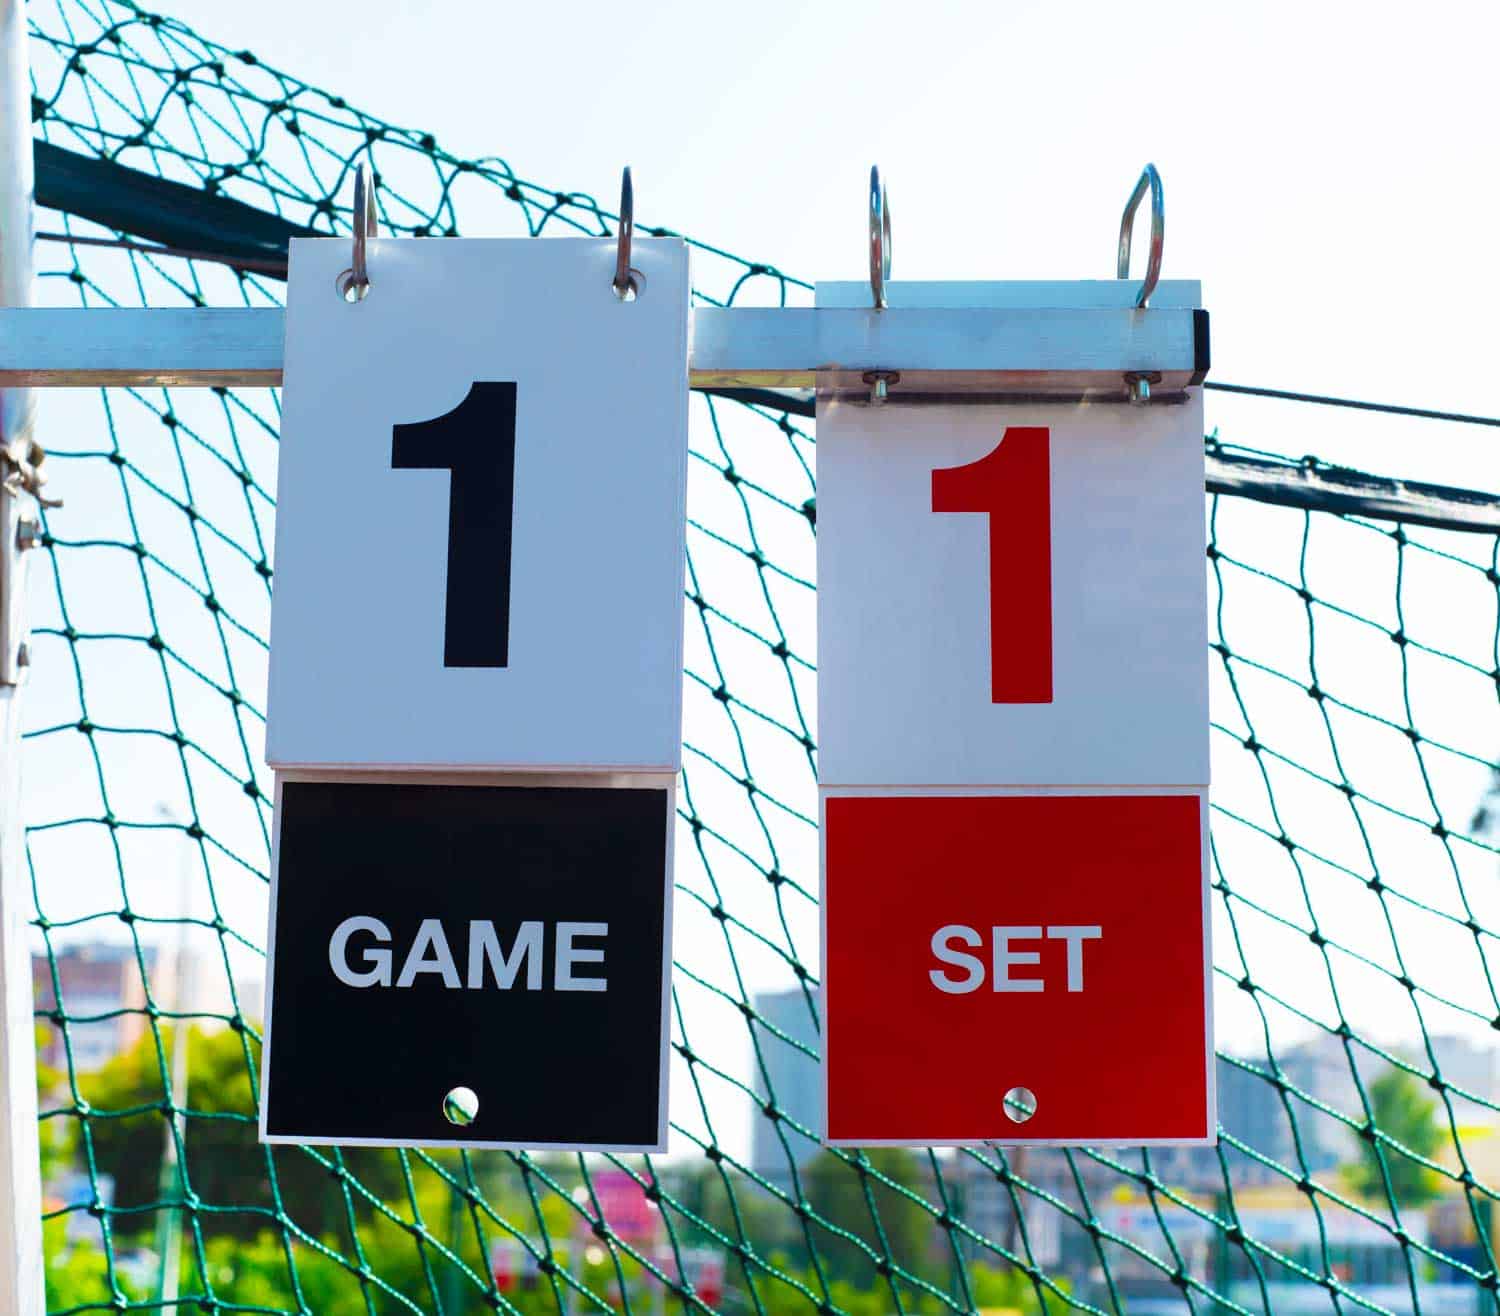 Scoreboard on a tennis court during an outdoor game